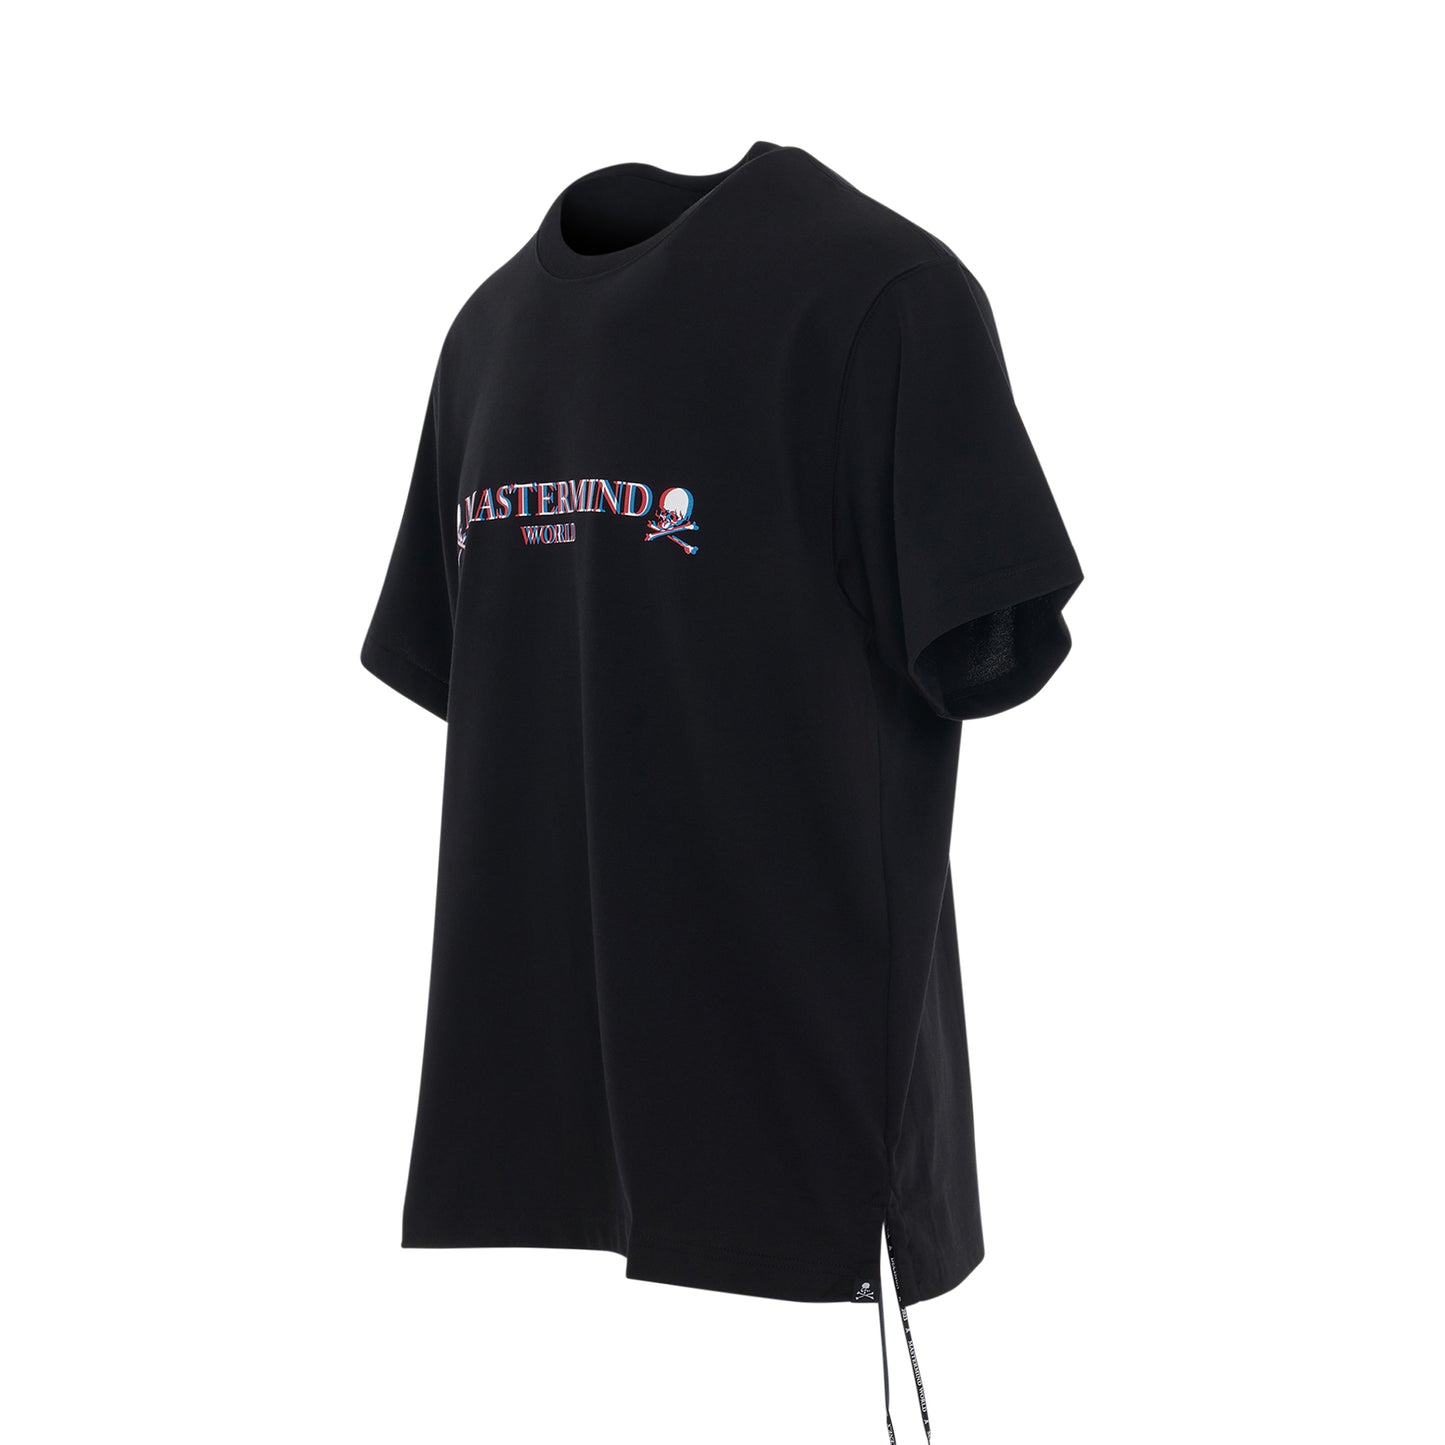 3D Rubber Printed Logo T-Shirt in Black